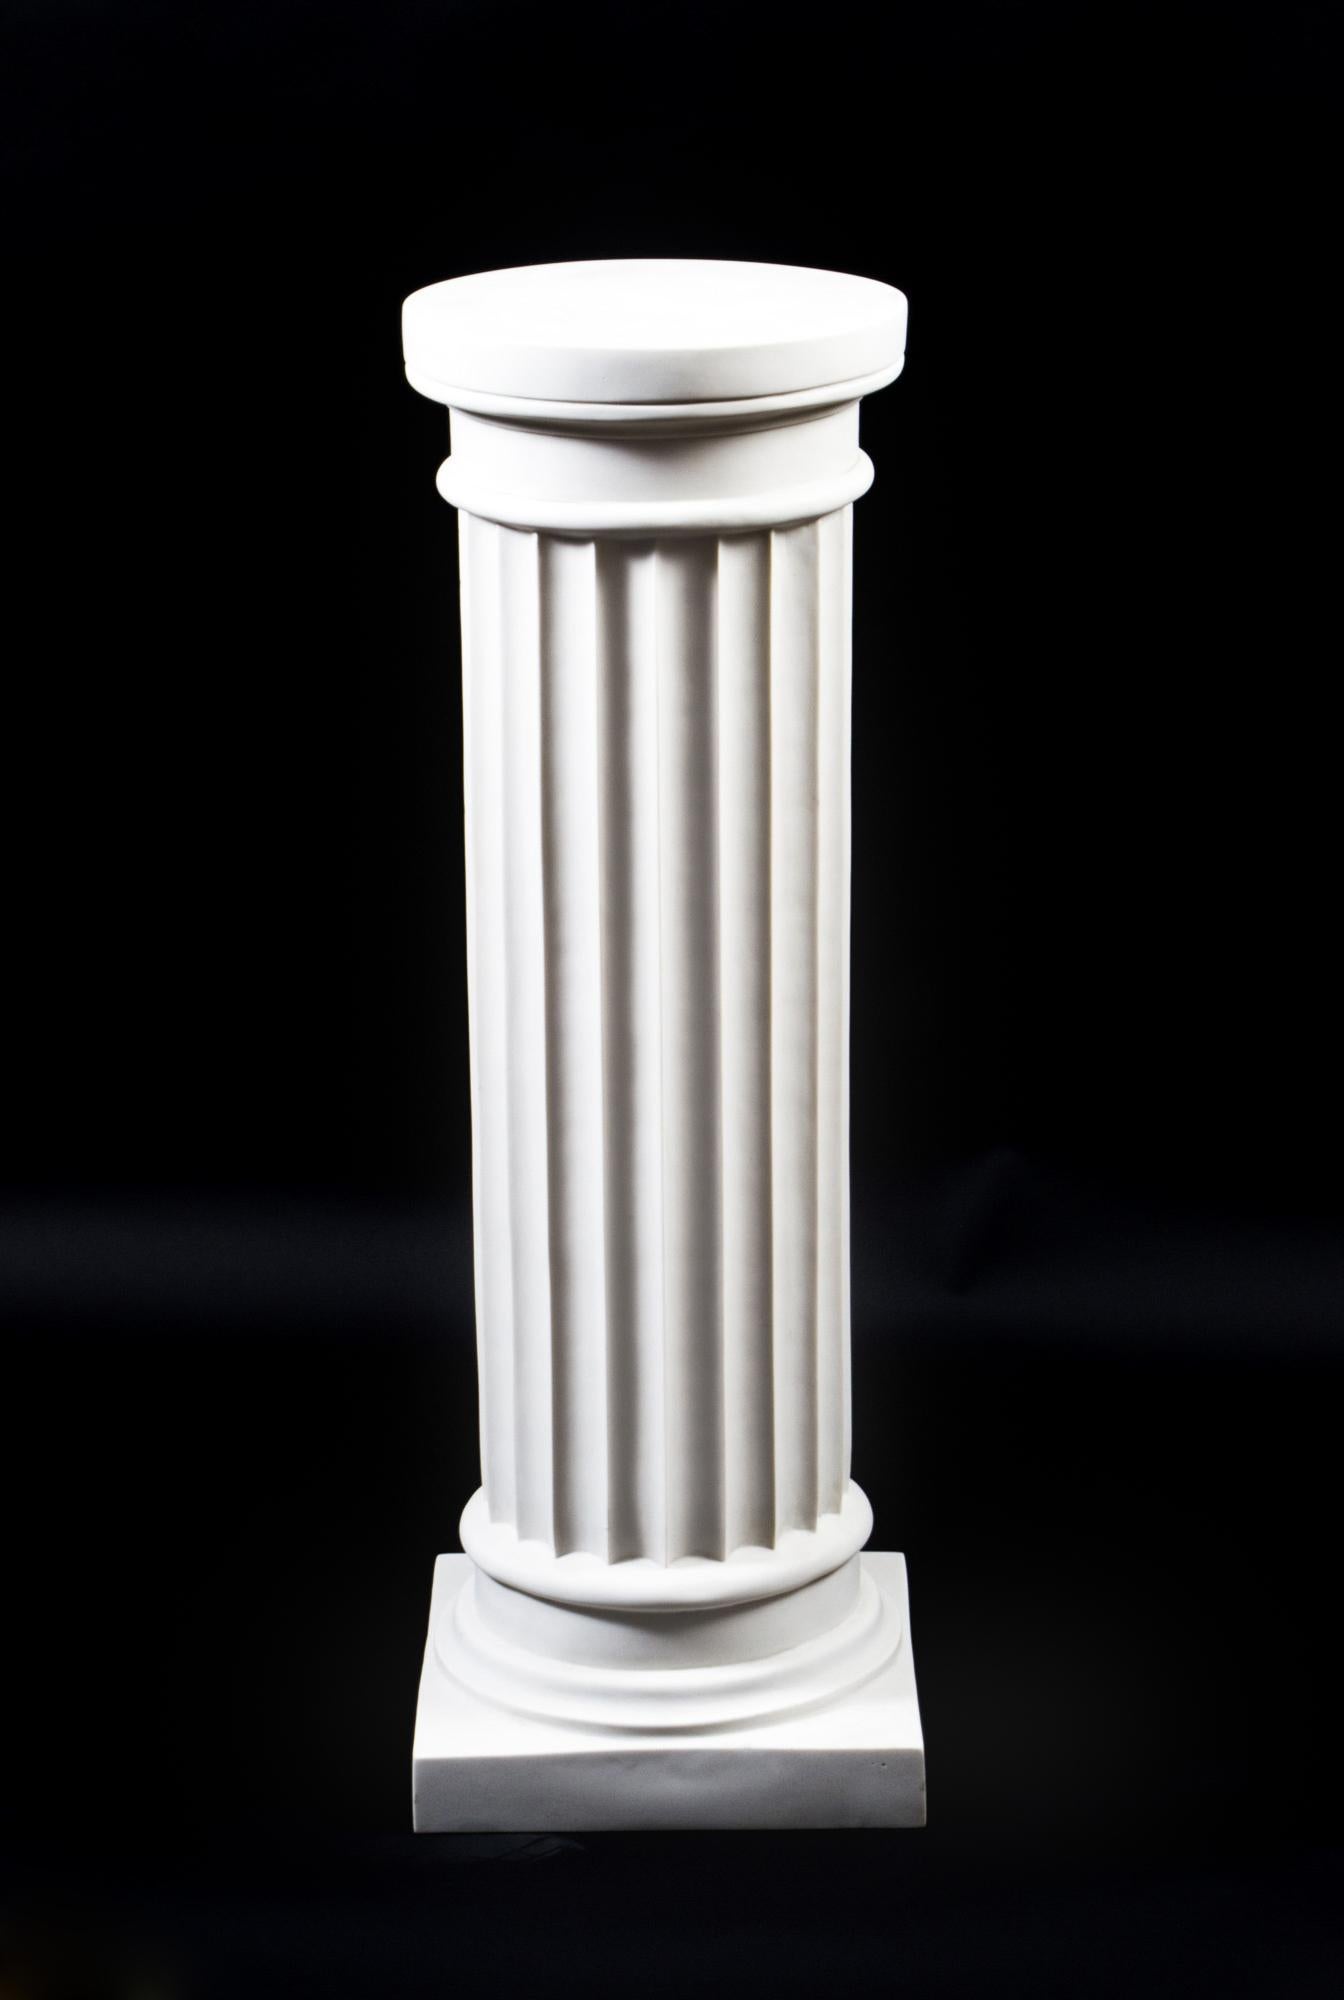 An elegant vintage pedestal in the form of a classical ancient Greek Doric column dating from the late 20th century.

The column has a fluted body with an plain and undecorated column capitals and tapers faintly larger in circumference toward the